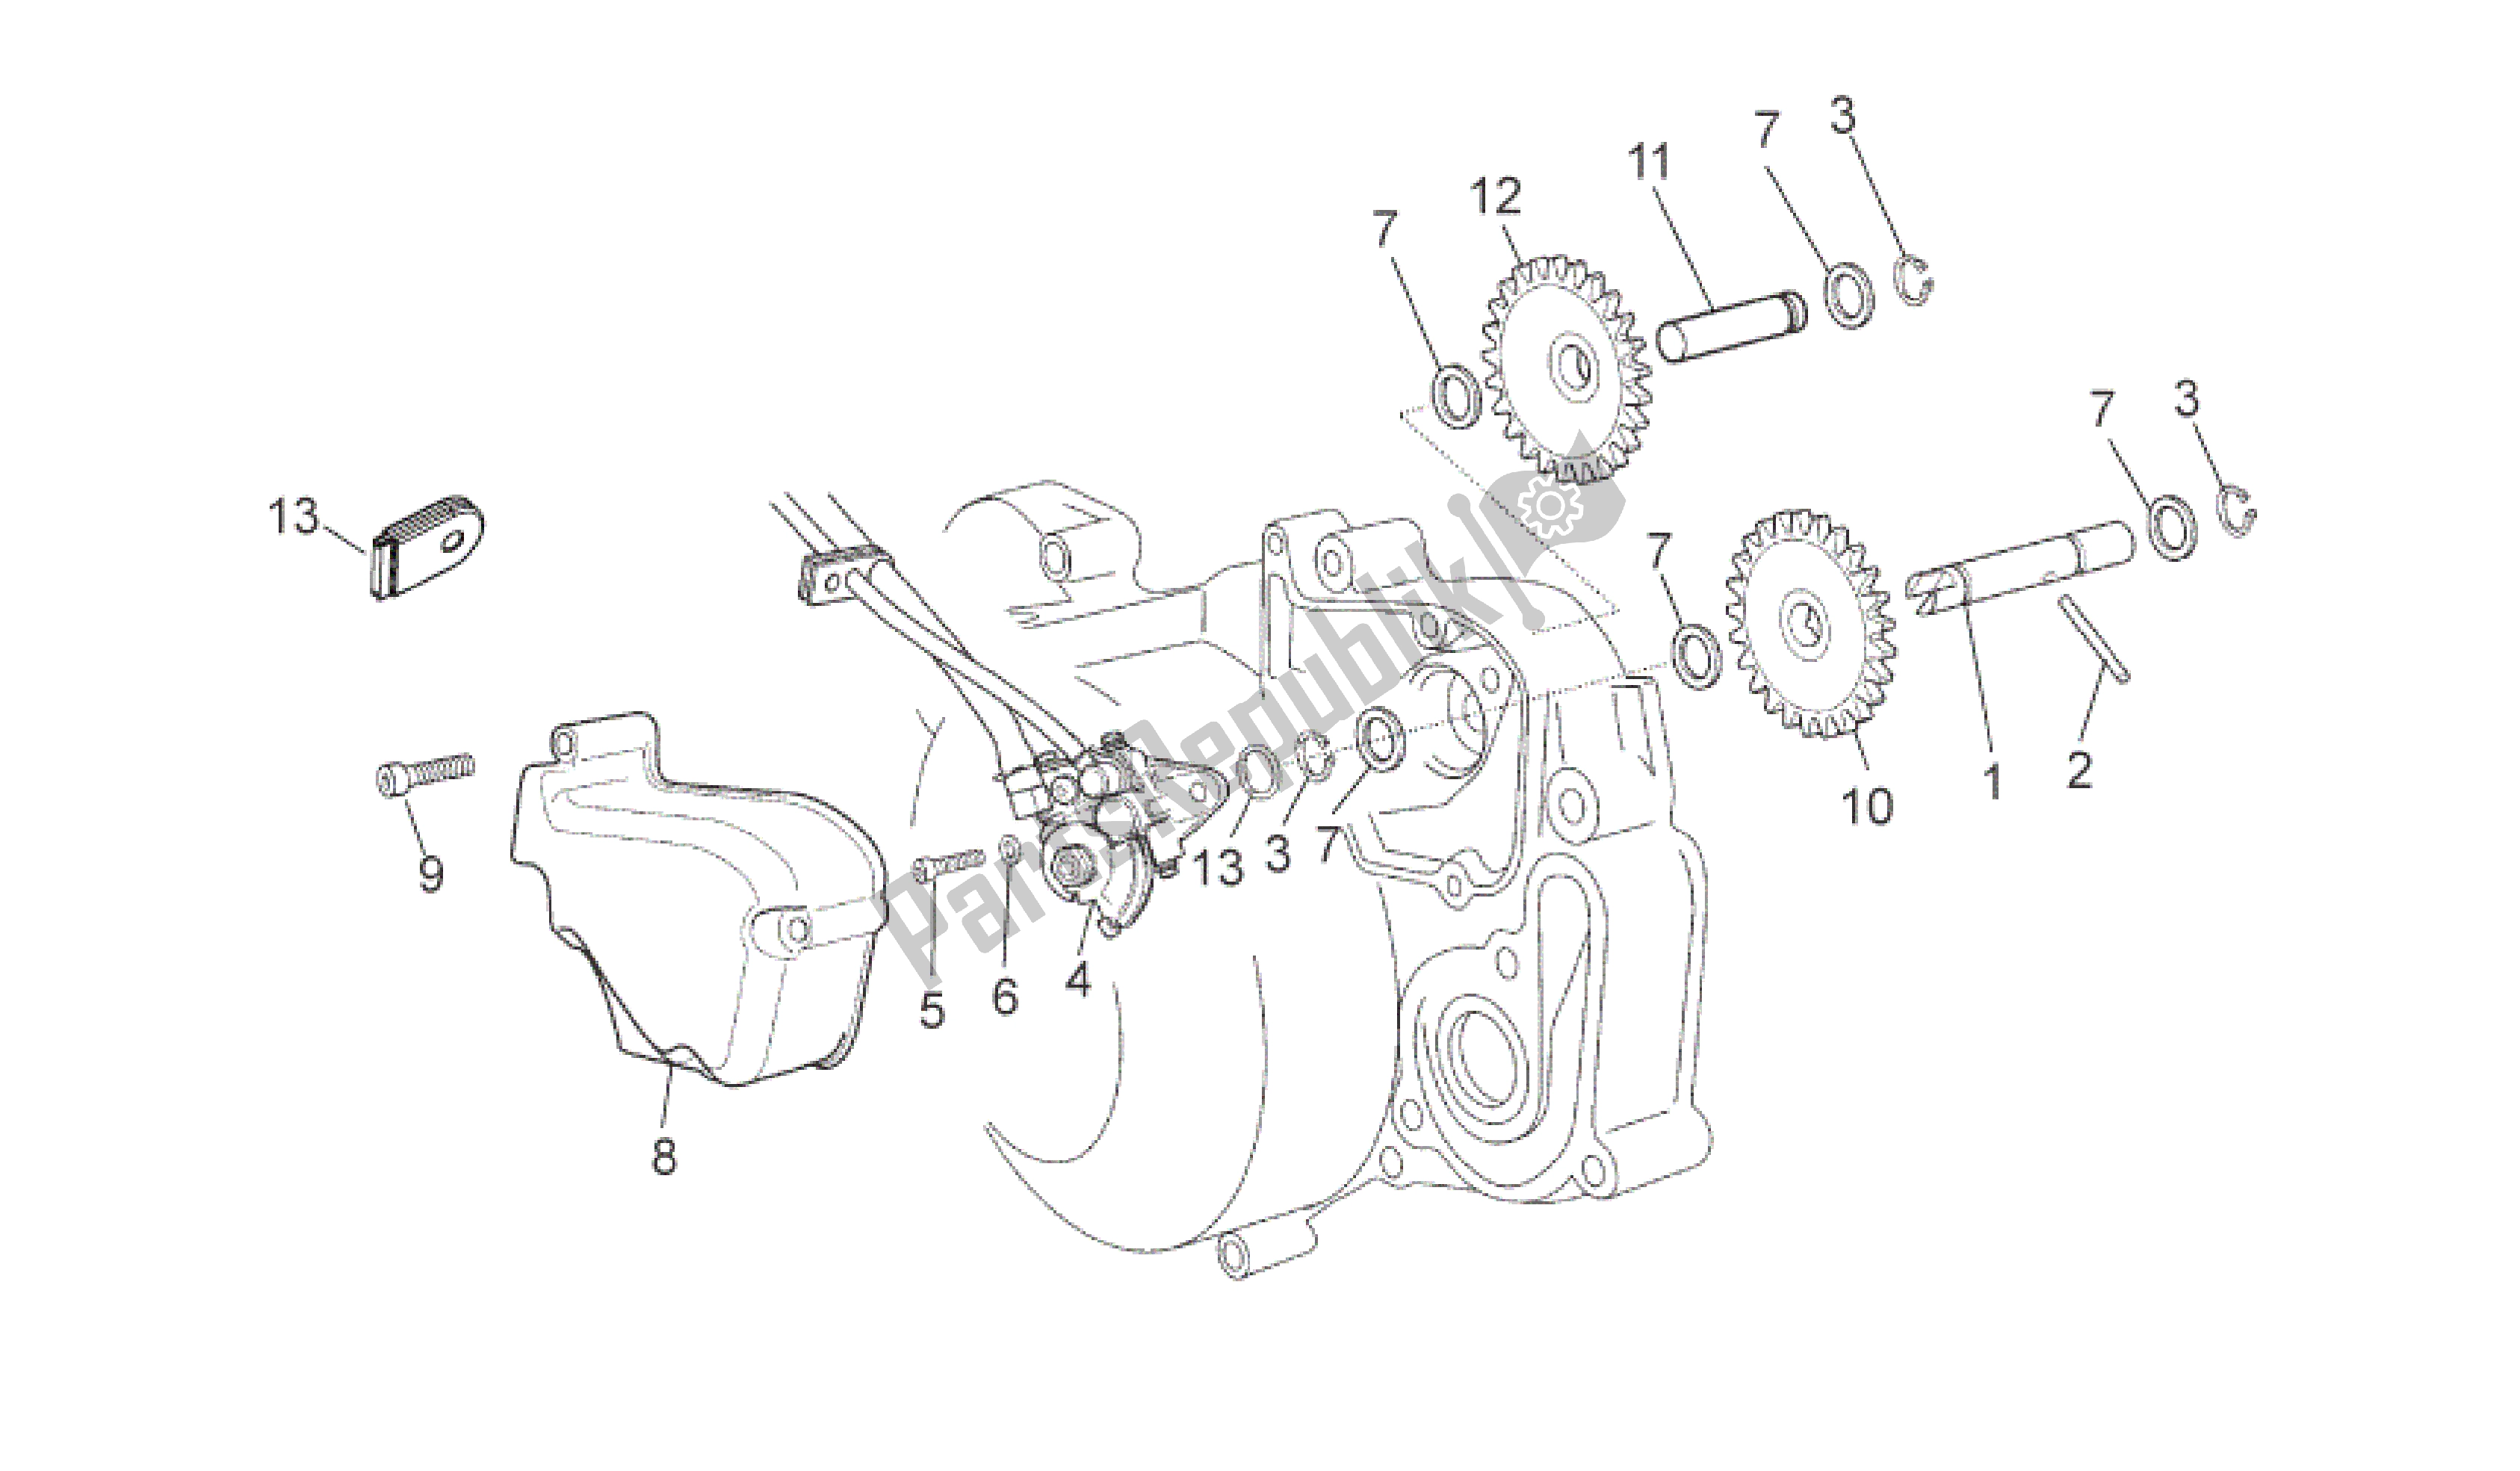 All parts for the Oil Pump of the Aprilia RS 50 2006 - 2010